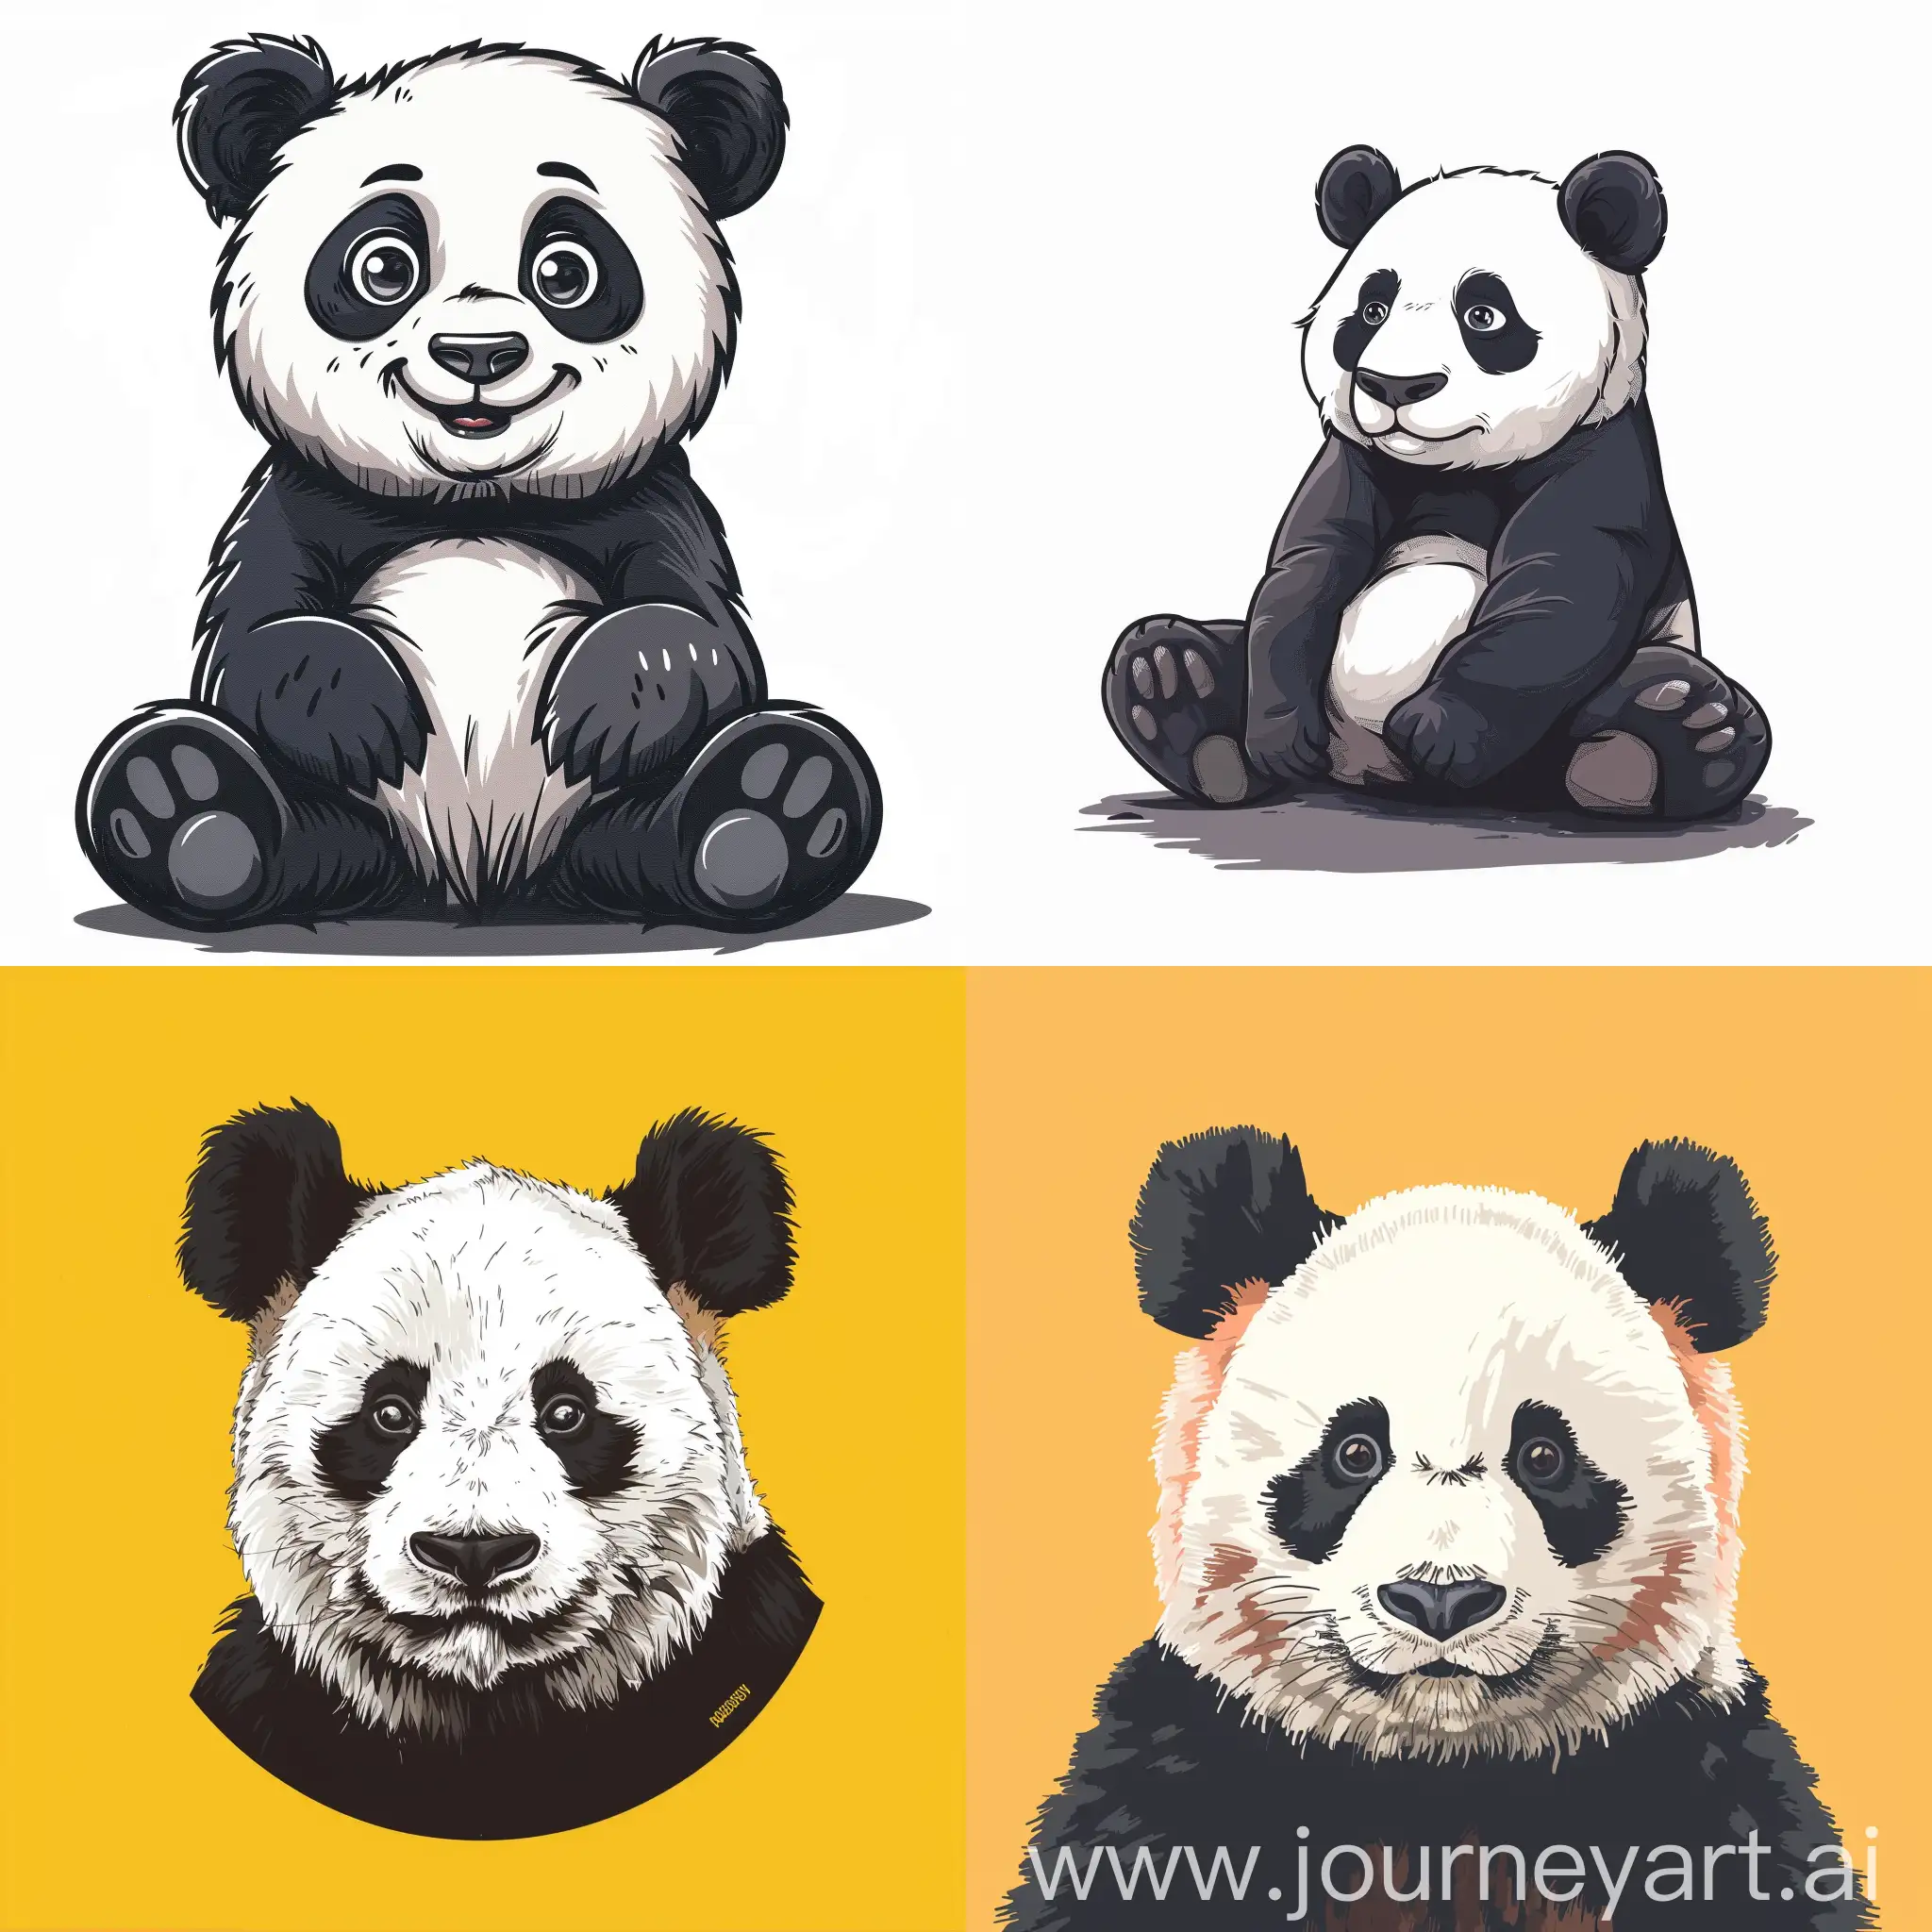 I want a panda in vector images